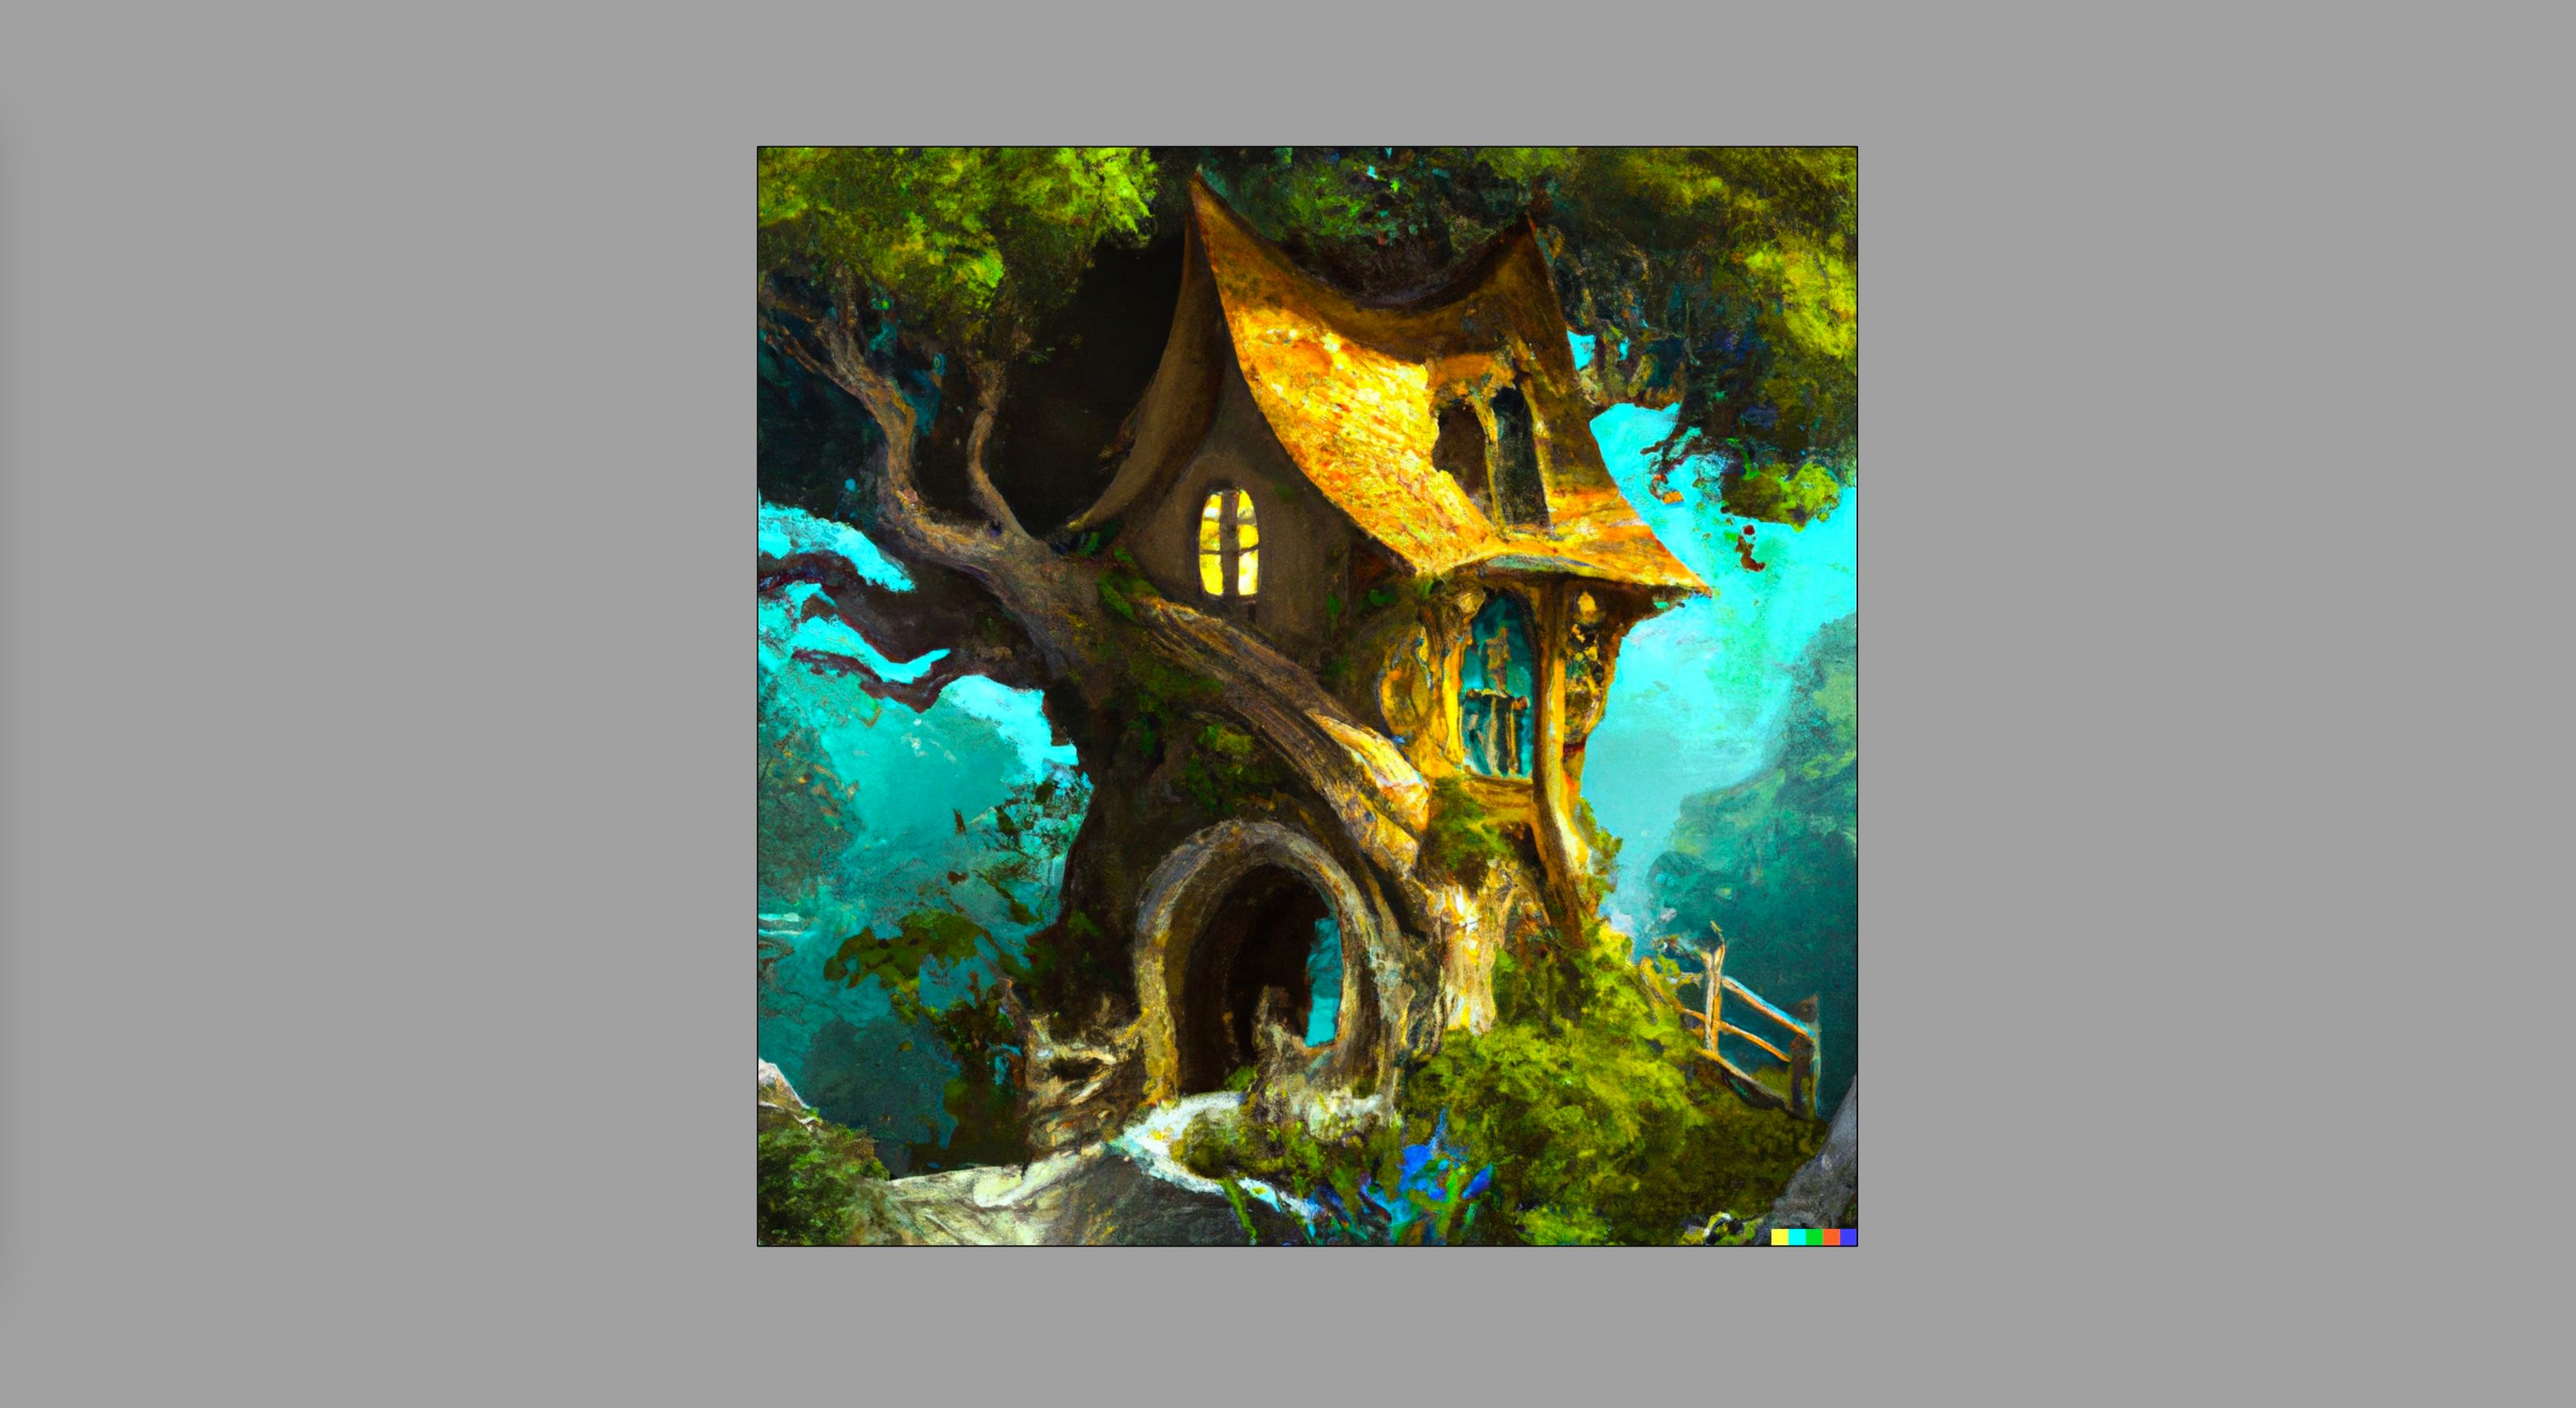 A cottage in a tree in the style of fantasty art, generated with Dall-E